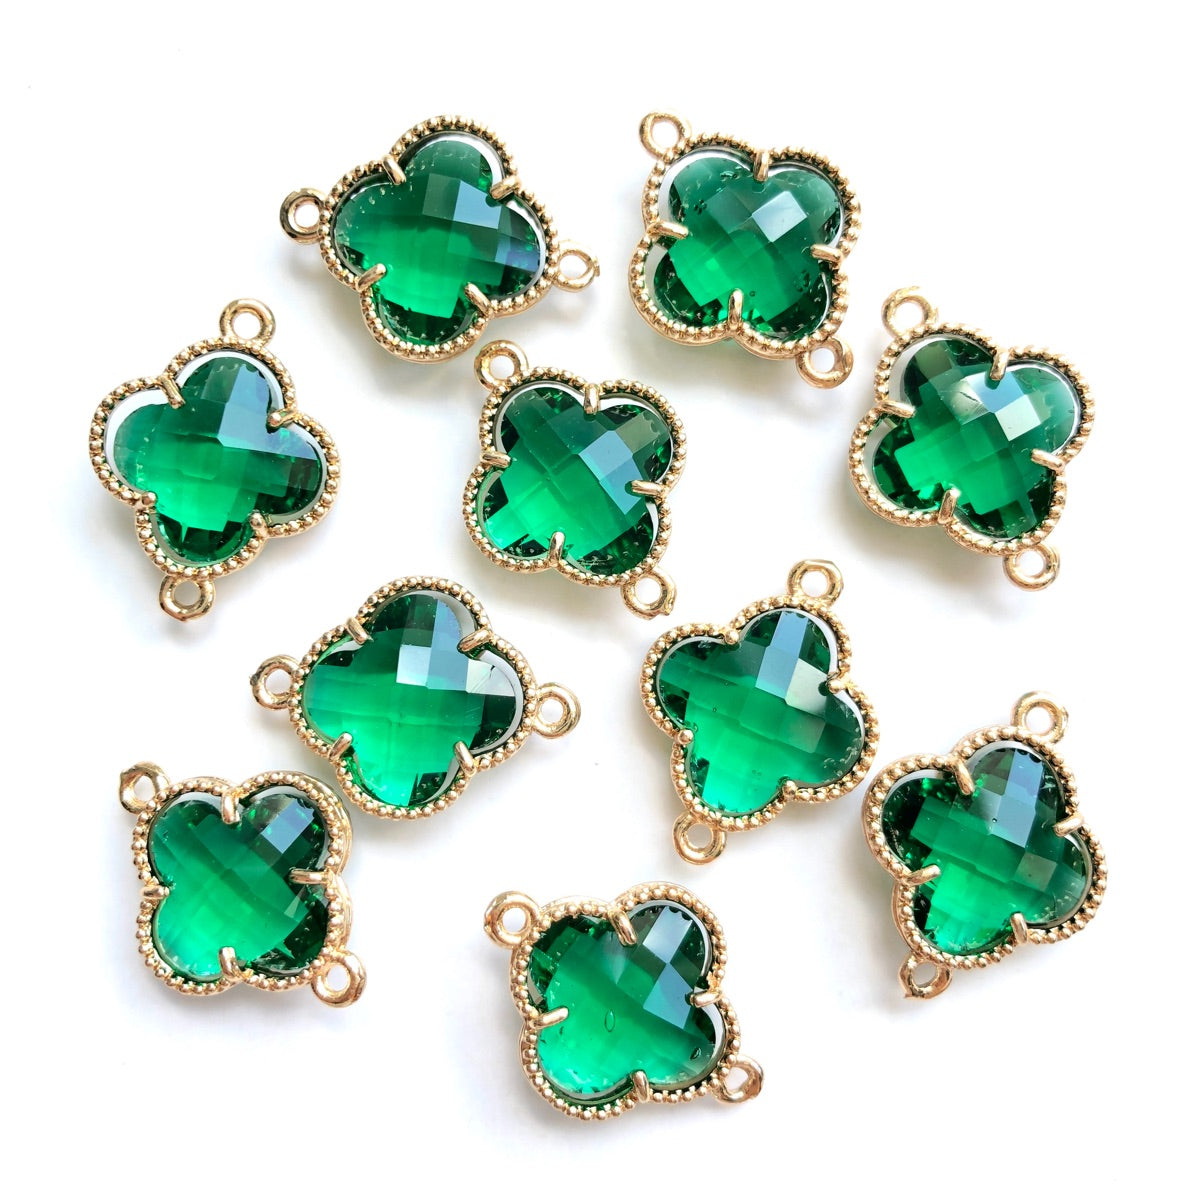 10pcs/Lot Gold Plated Glass Crystal Clover Flower Connectors Green Stone Charms Flower Glass Beads New Charms Arrivals Charms Beads Beyond